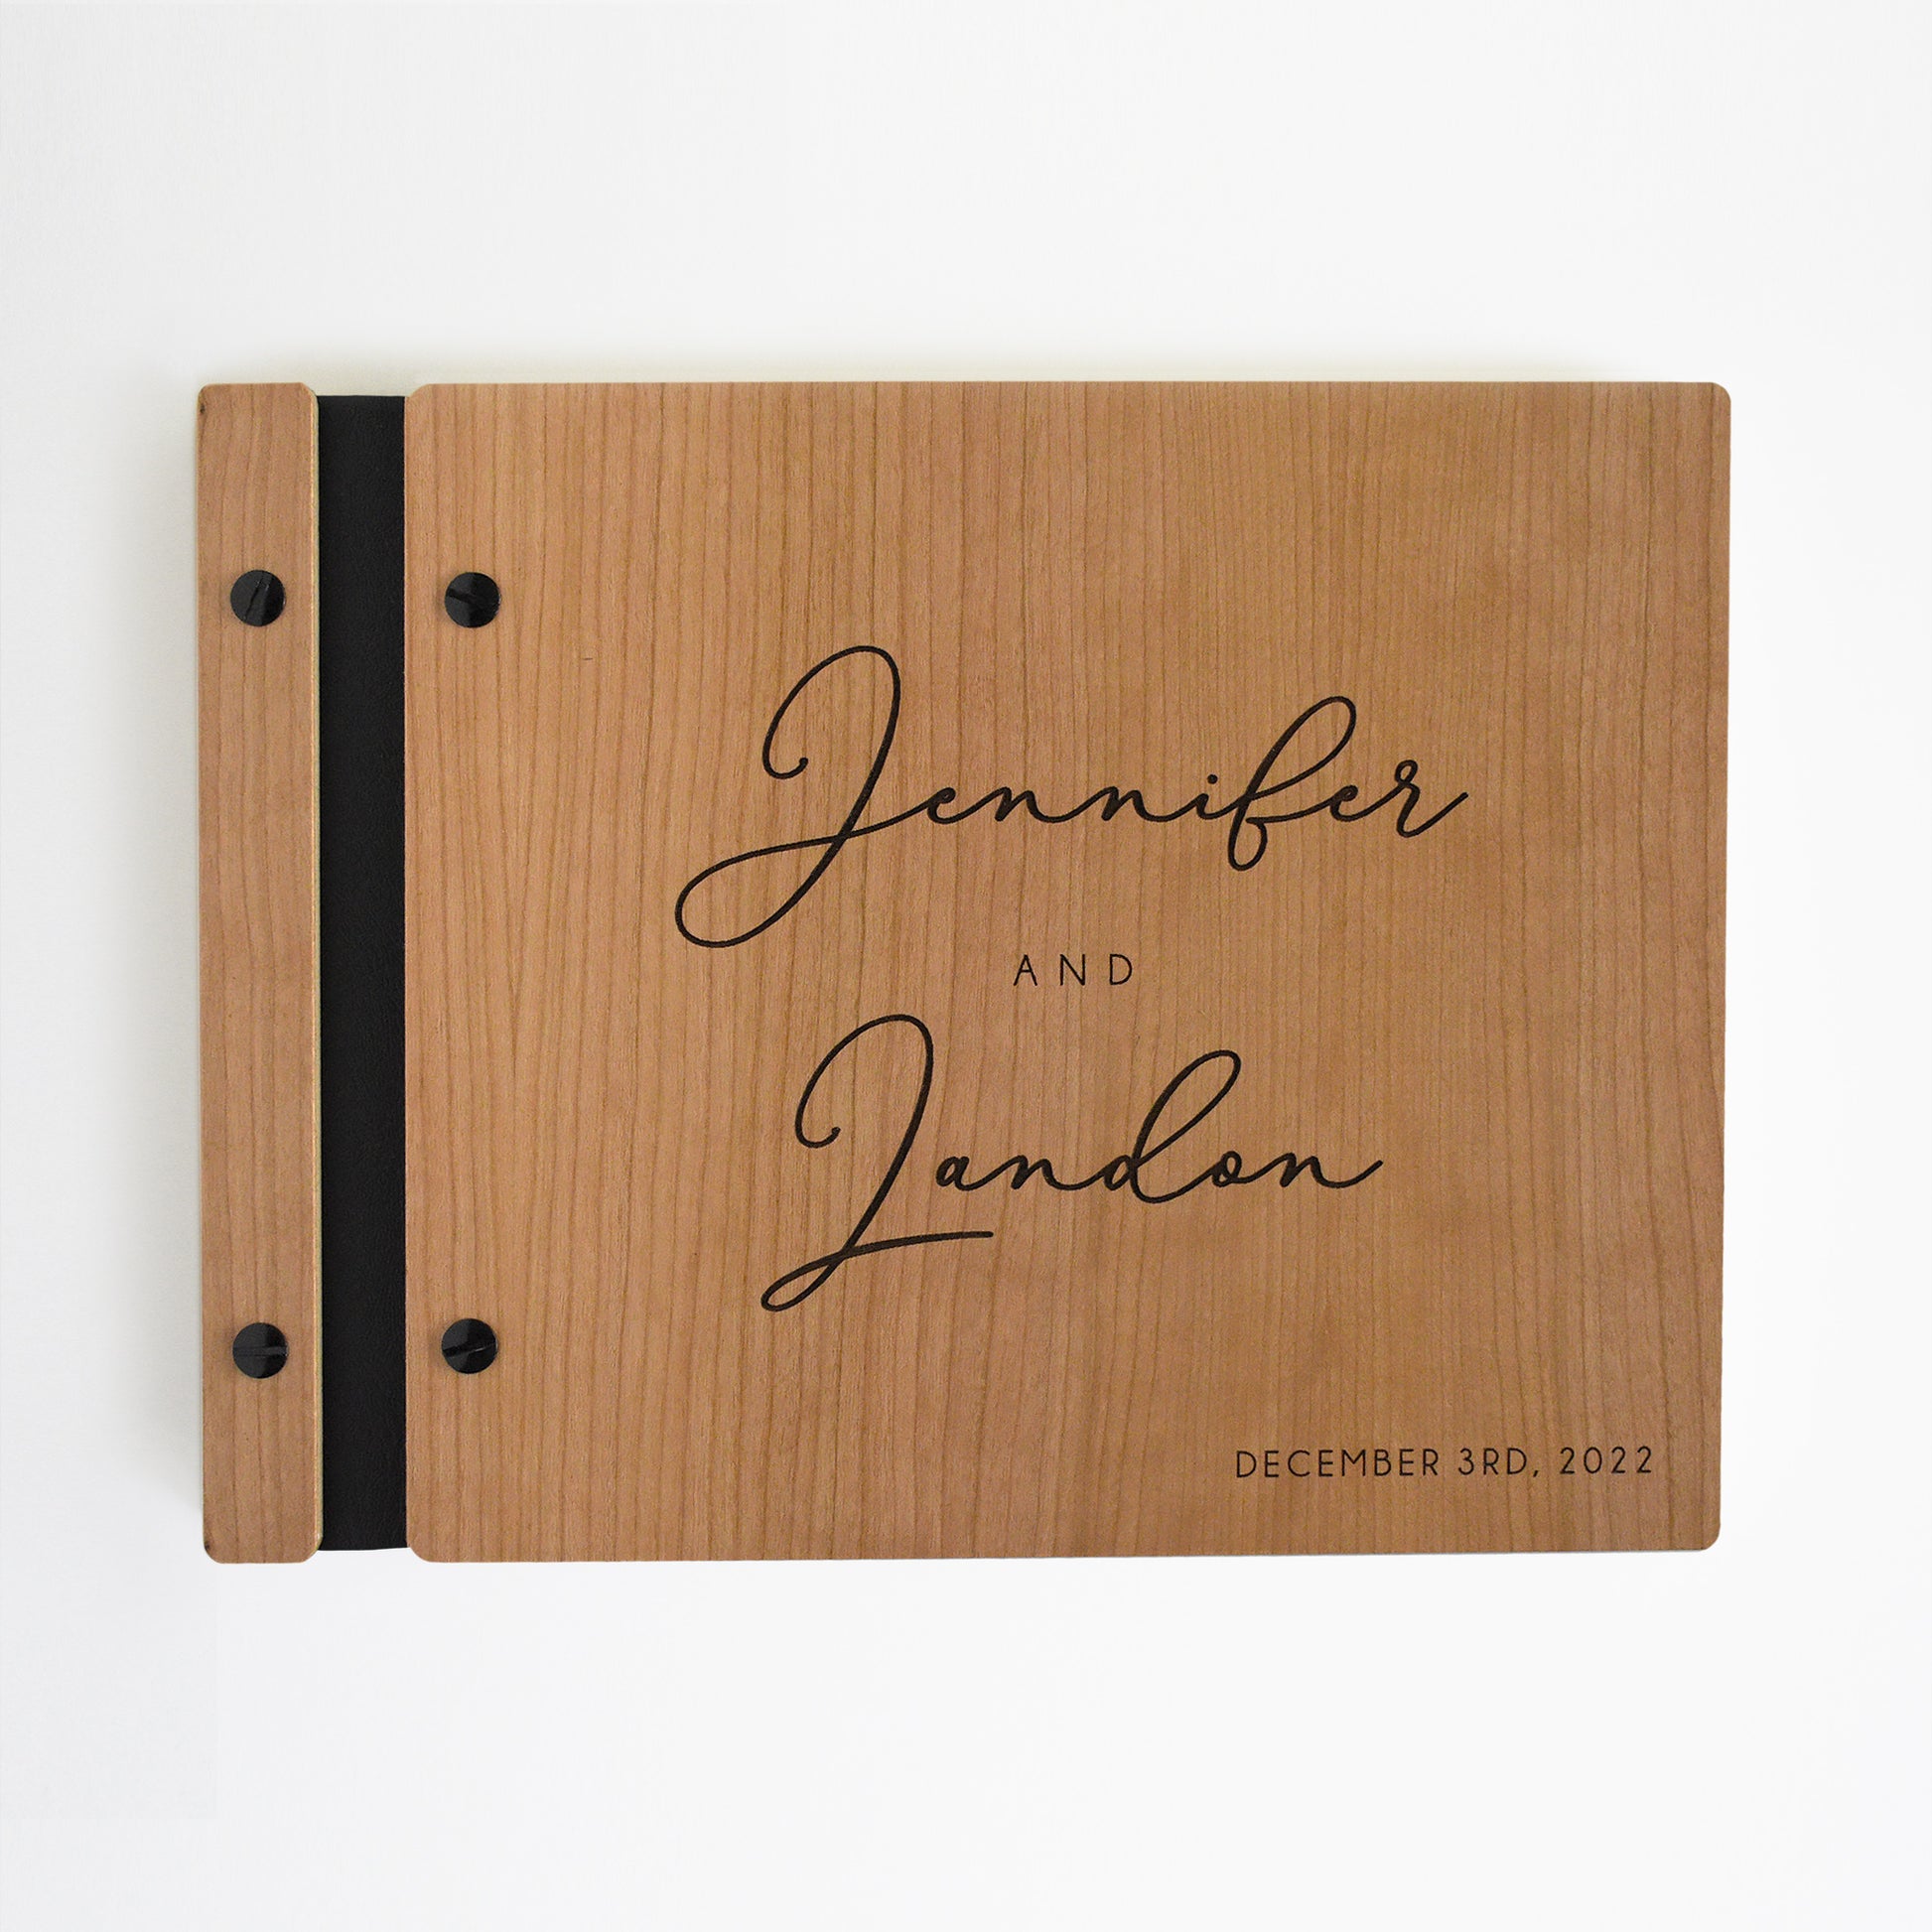 An 8.5x11" guest book lies on a table. Made of cherry wood, black vegan leather binding, and copper hardware. The front cover reads “Jonathan and Christina, January 1, 2023.” 